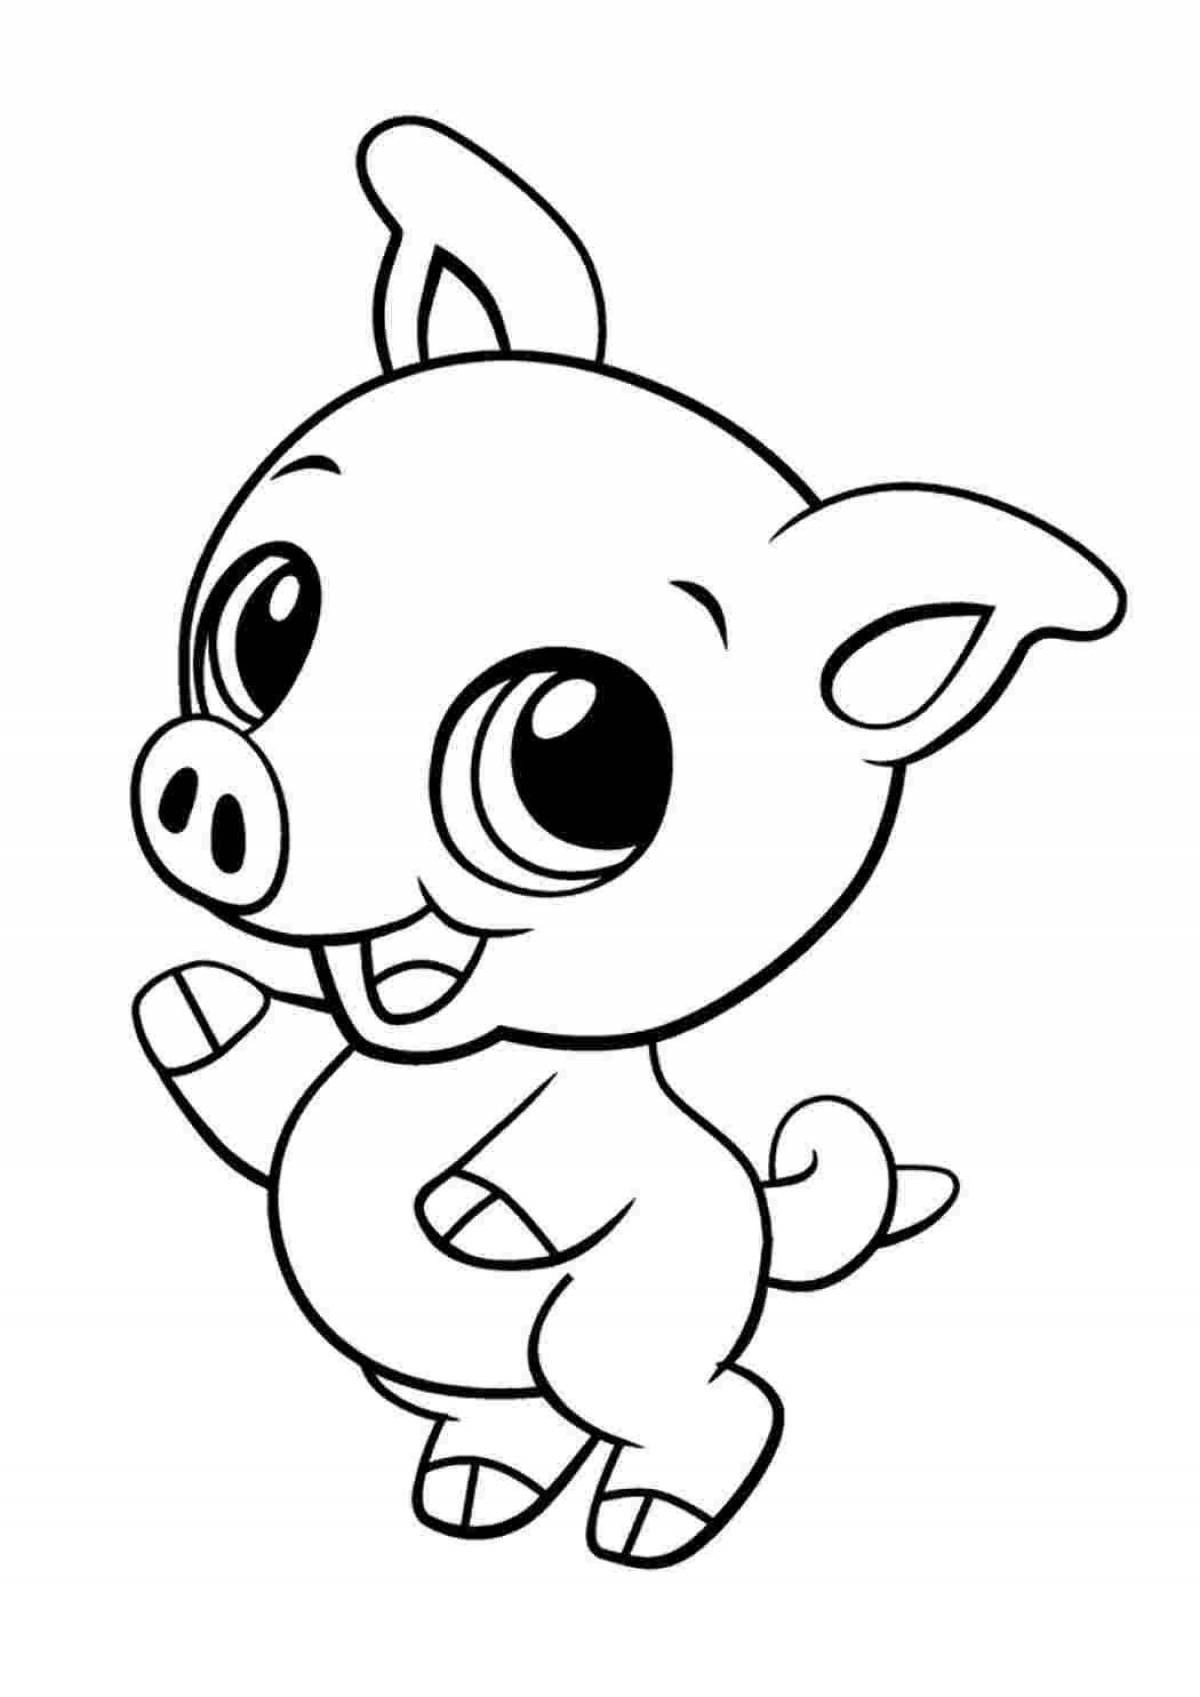 Amazing coloring pages with cute animals for kids